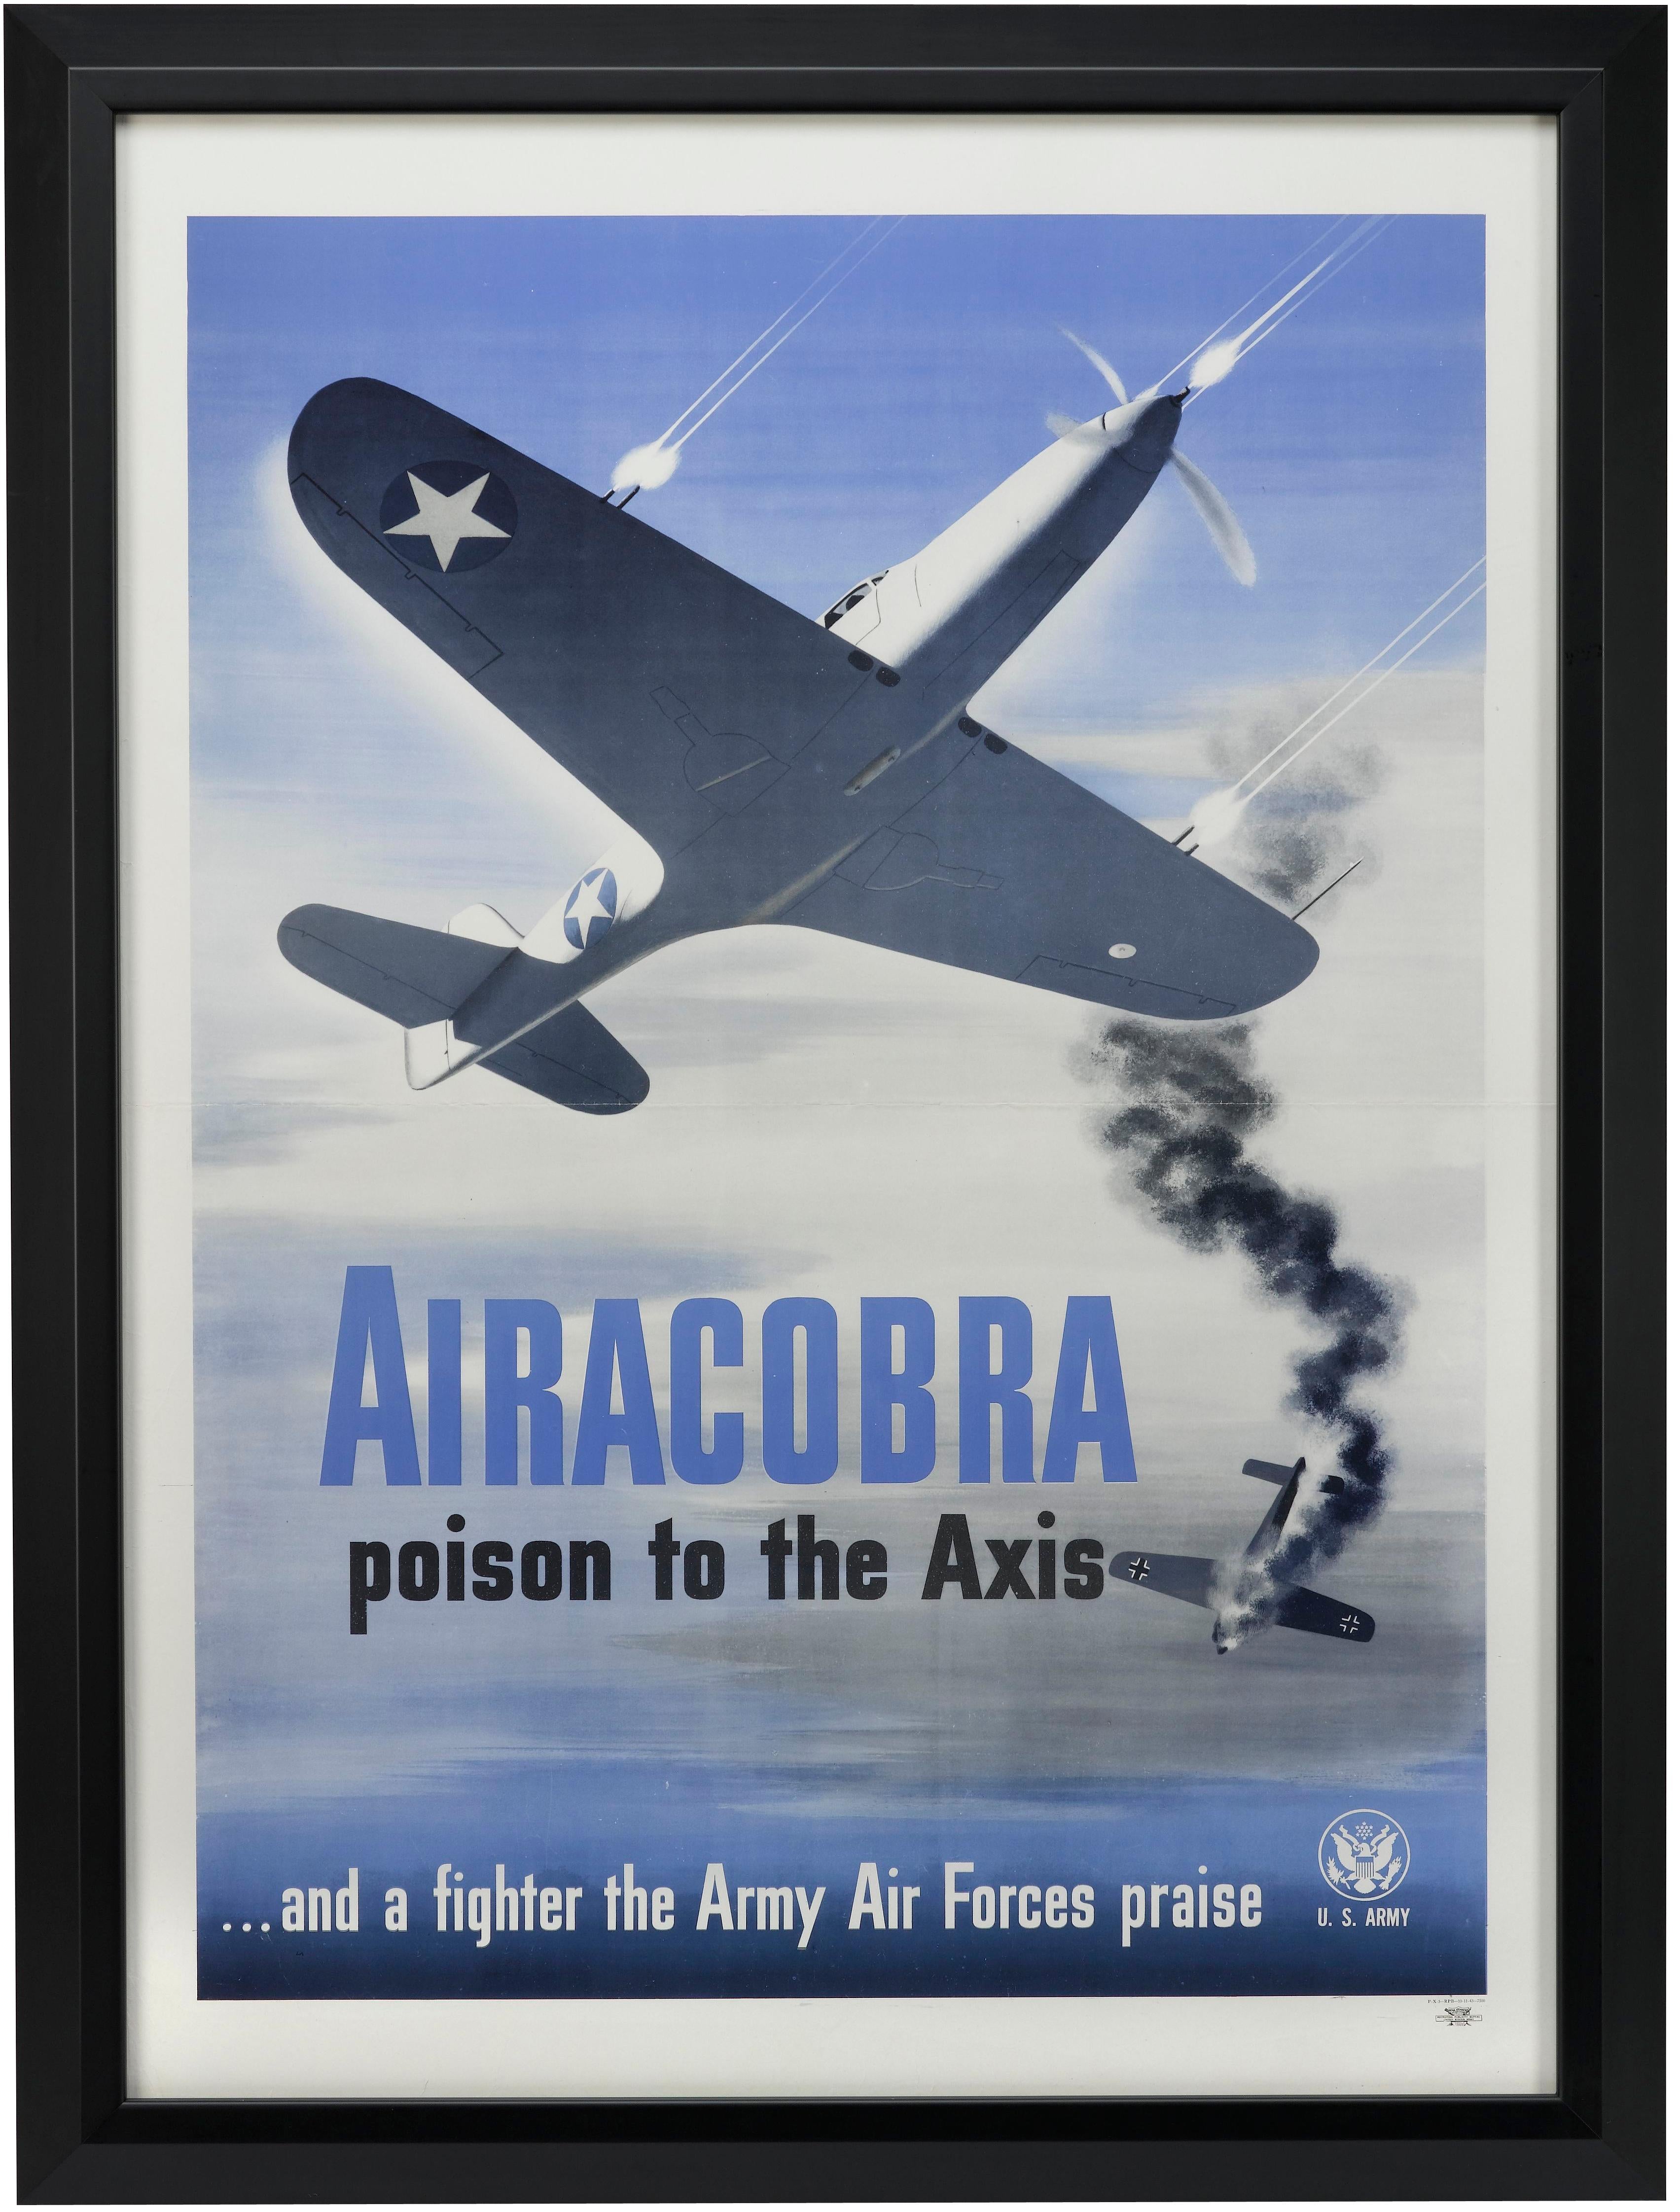 Presented is a vintage WWII U.S. Army poster of a P-39 Airacobra fighter plane. The poster was published by the Recruiting Publicity Bureau in 1943. The poster depicts a P-39 mid-battle, set against a bright blue sky. The P-39 fires a round from its